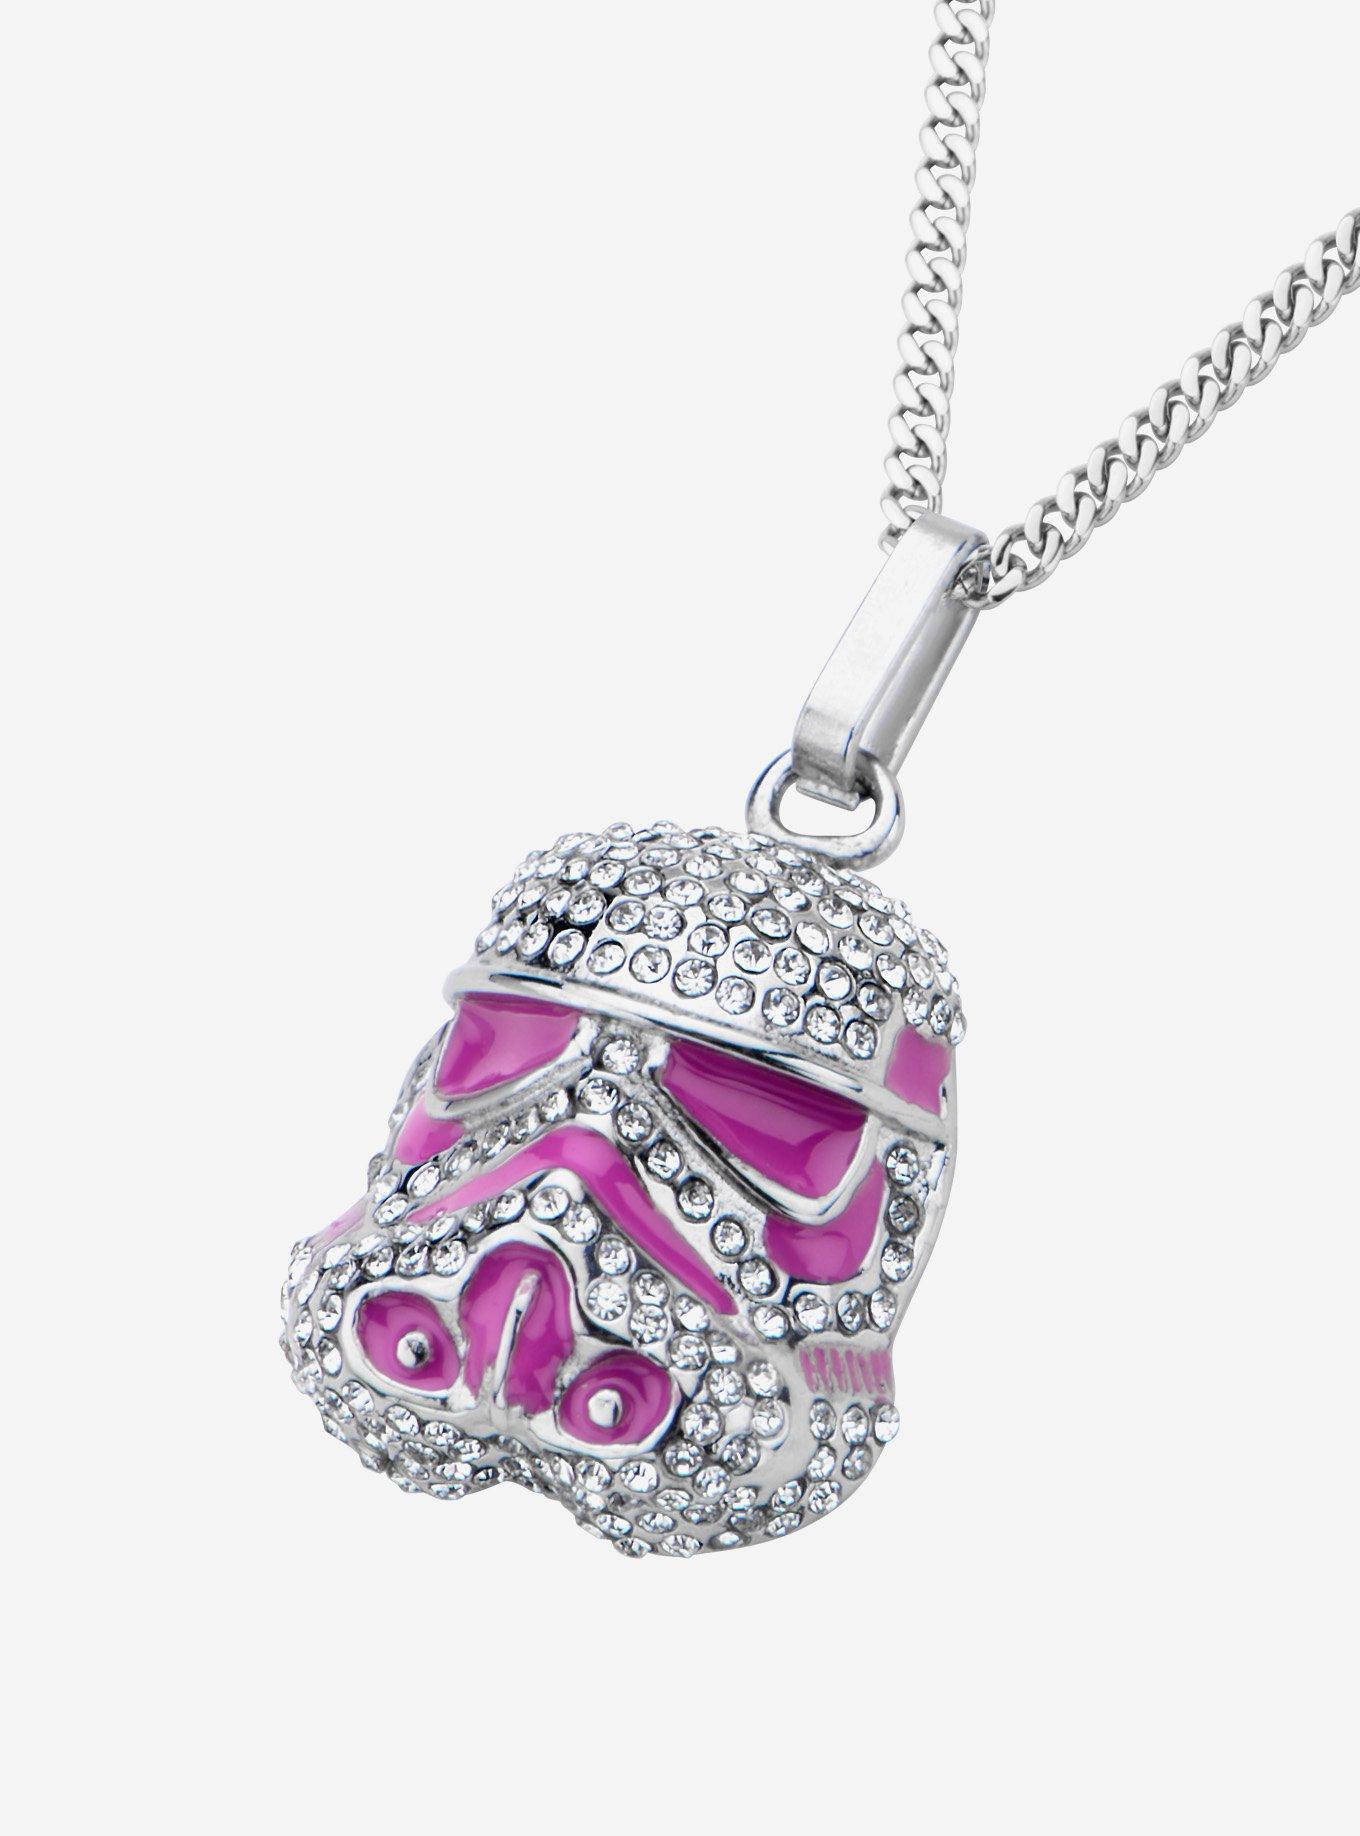 Star Wars Stormtrooper with Clear Gem and Pink Enamel Filled Pendant Necklace, , alternate